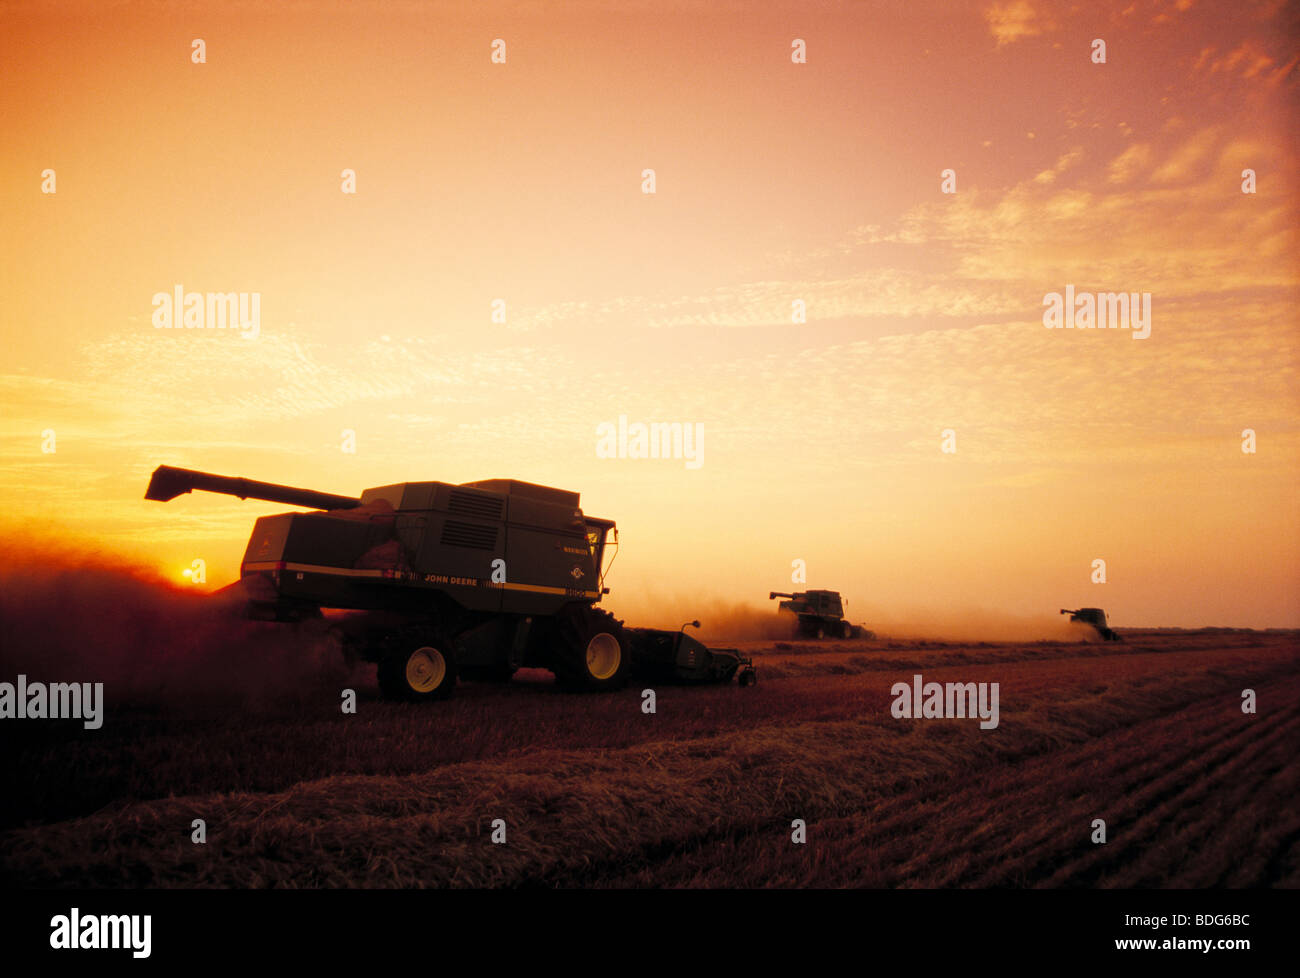 Agriculture - Combines harvesting swathed and dried wheat at sunset / near Niverville, Manitoba, Canada. Stock Photo